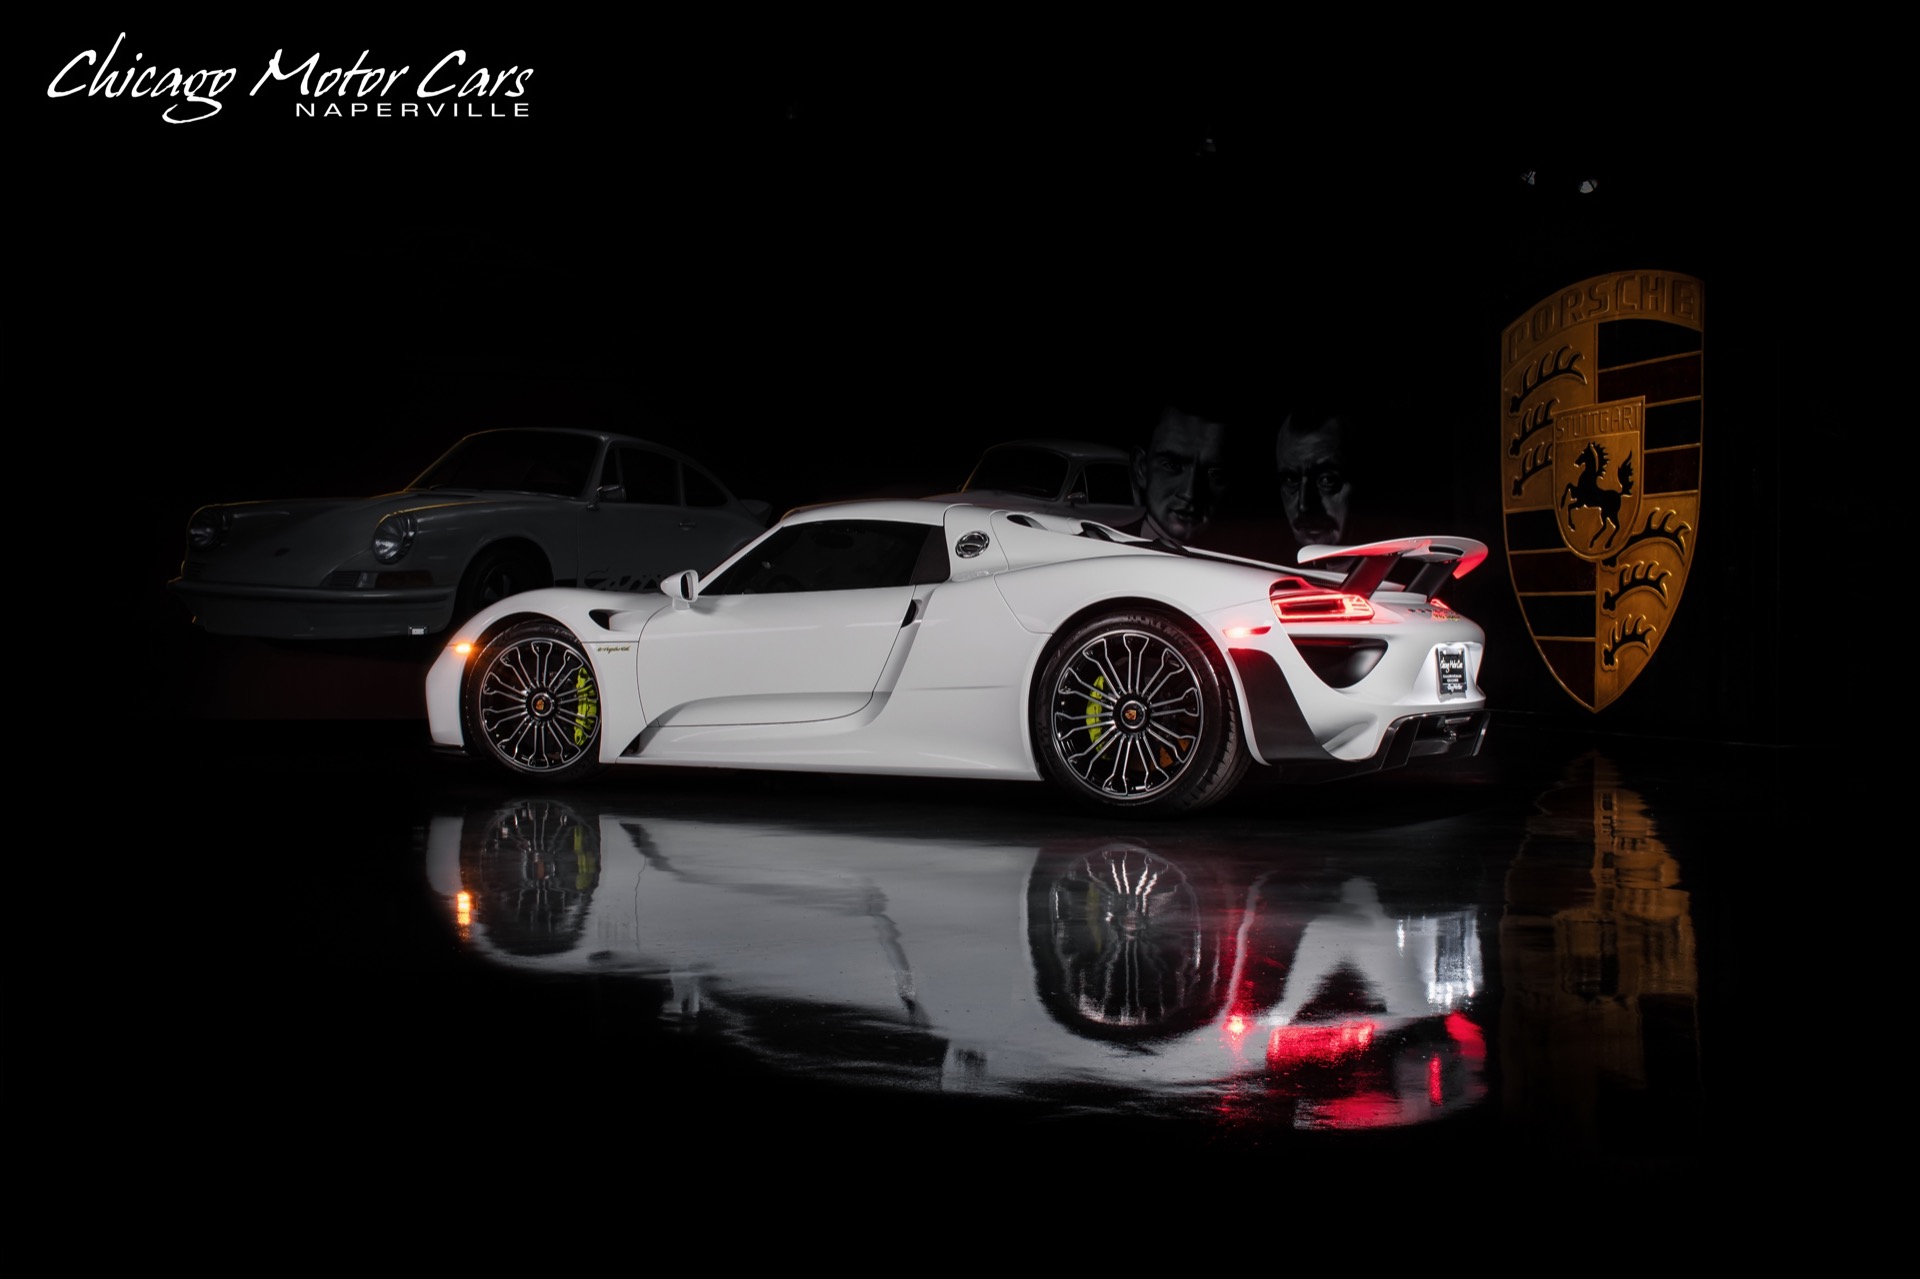 Used-2015-Porsche-918-Spyder-Only-1034-Miles-Serviced-RARE-Collector-Quality-White